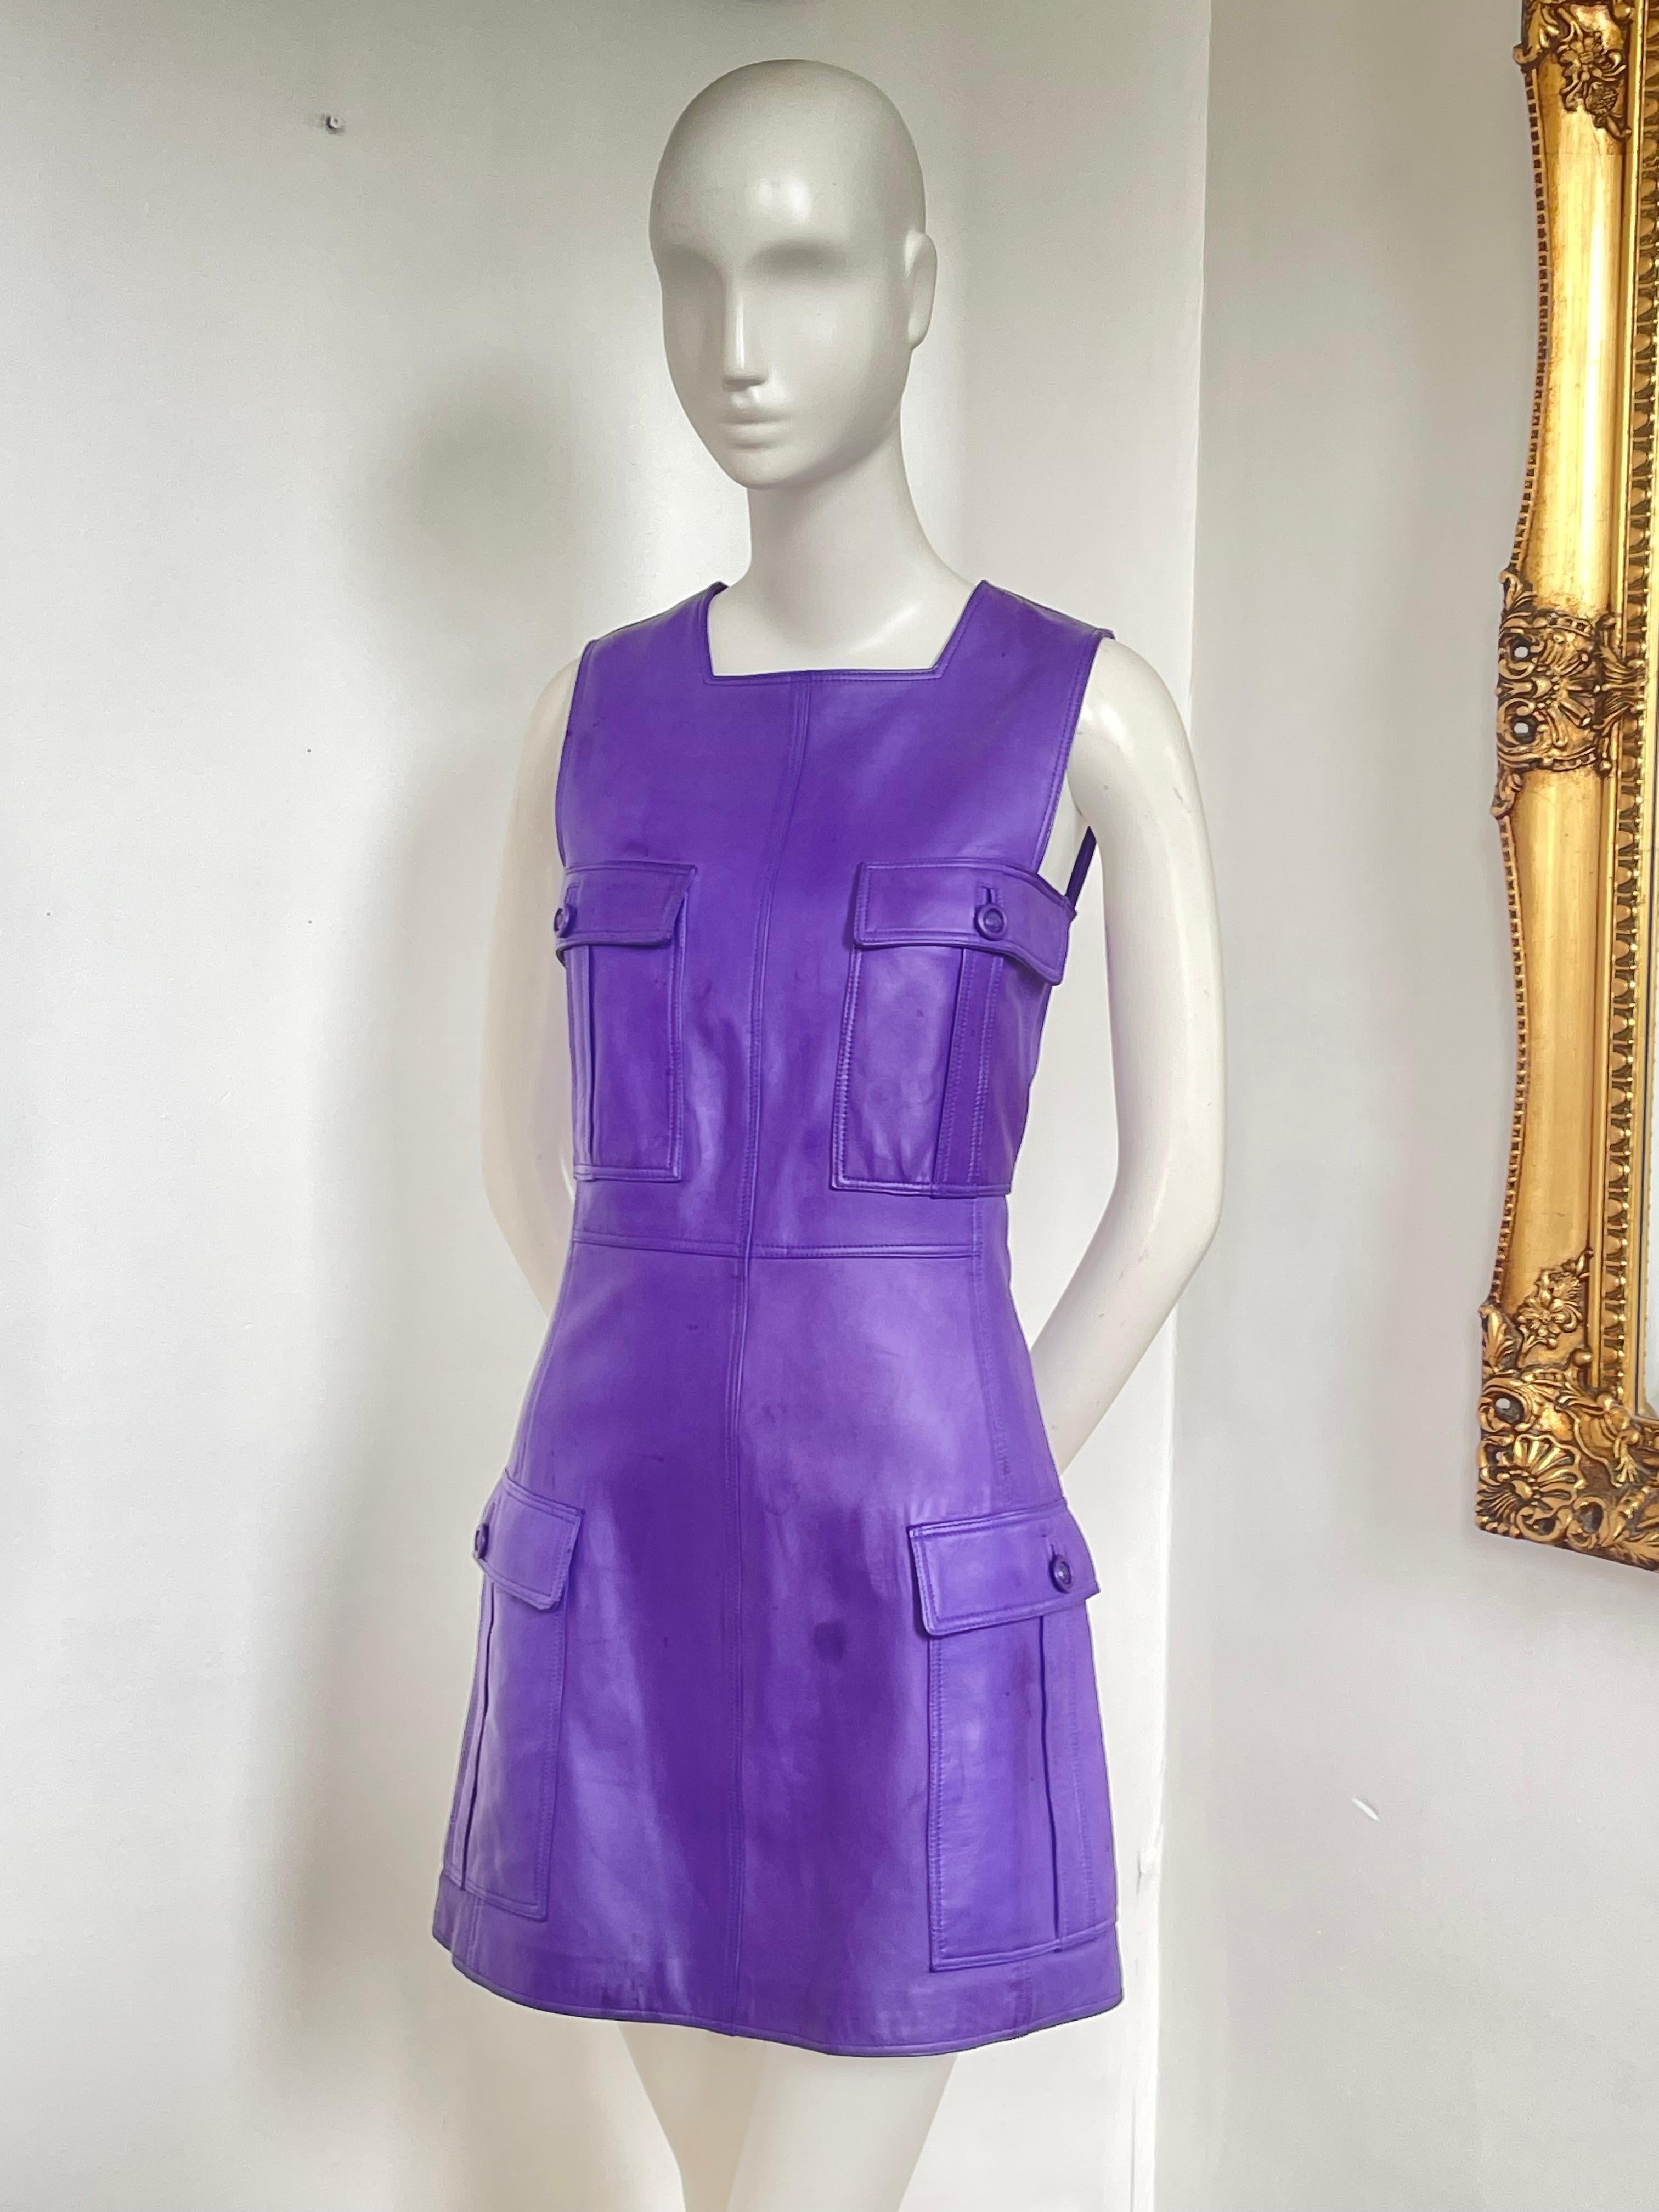 FW 1996 Versace purple leather shift dress with medusa buttons In Fair Condition For Sale In London, GB